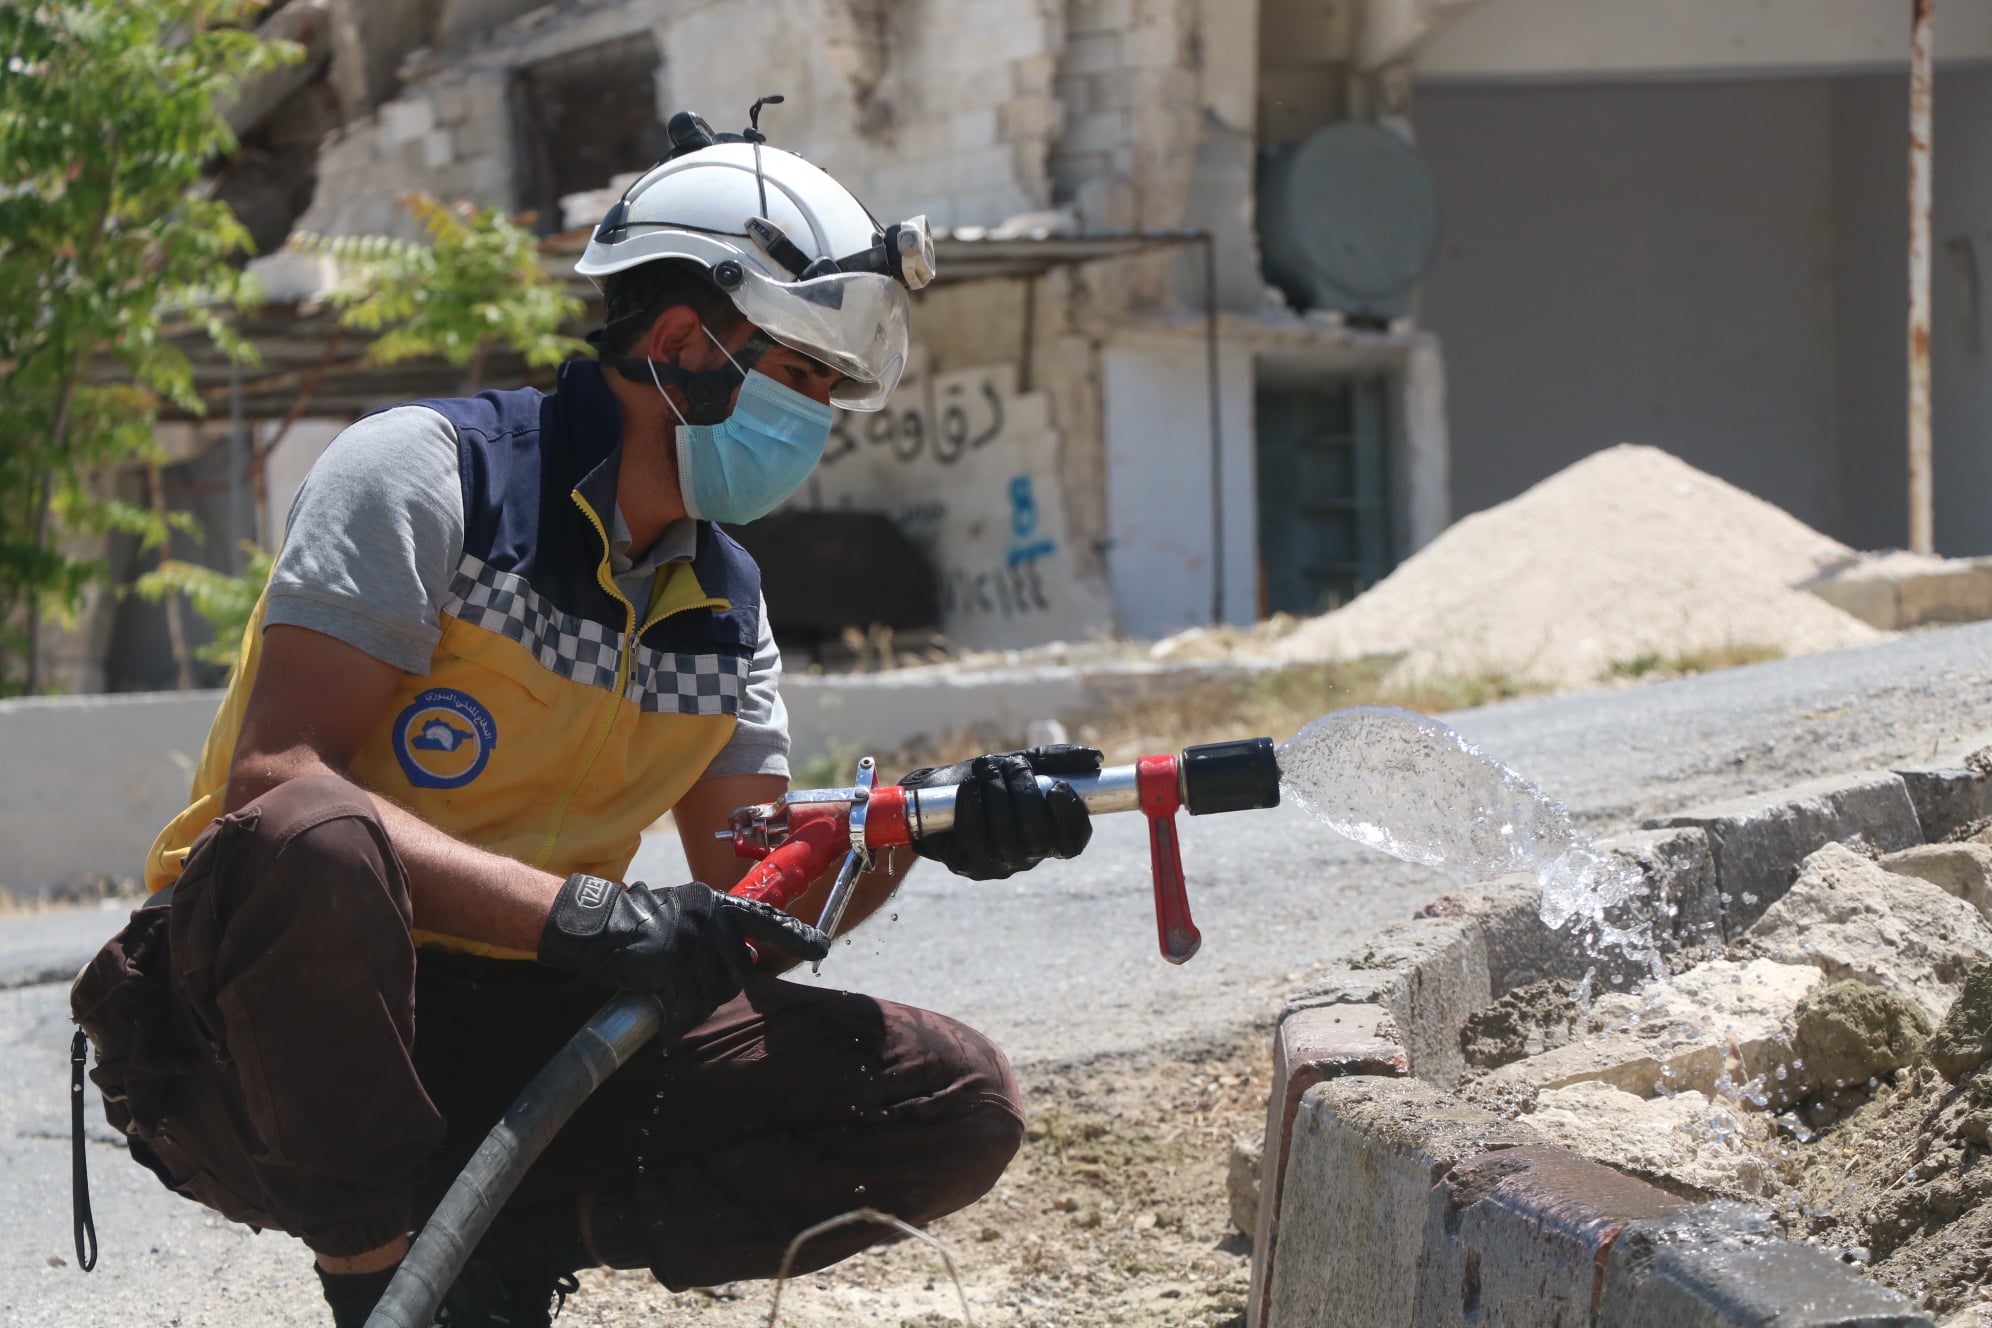 New Developments: Fraud and Racketeering in the White Helmets